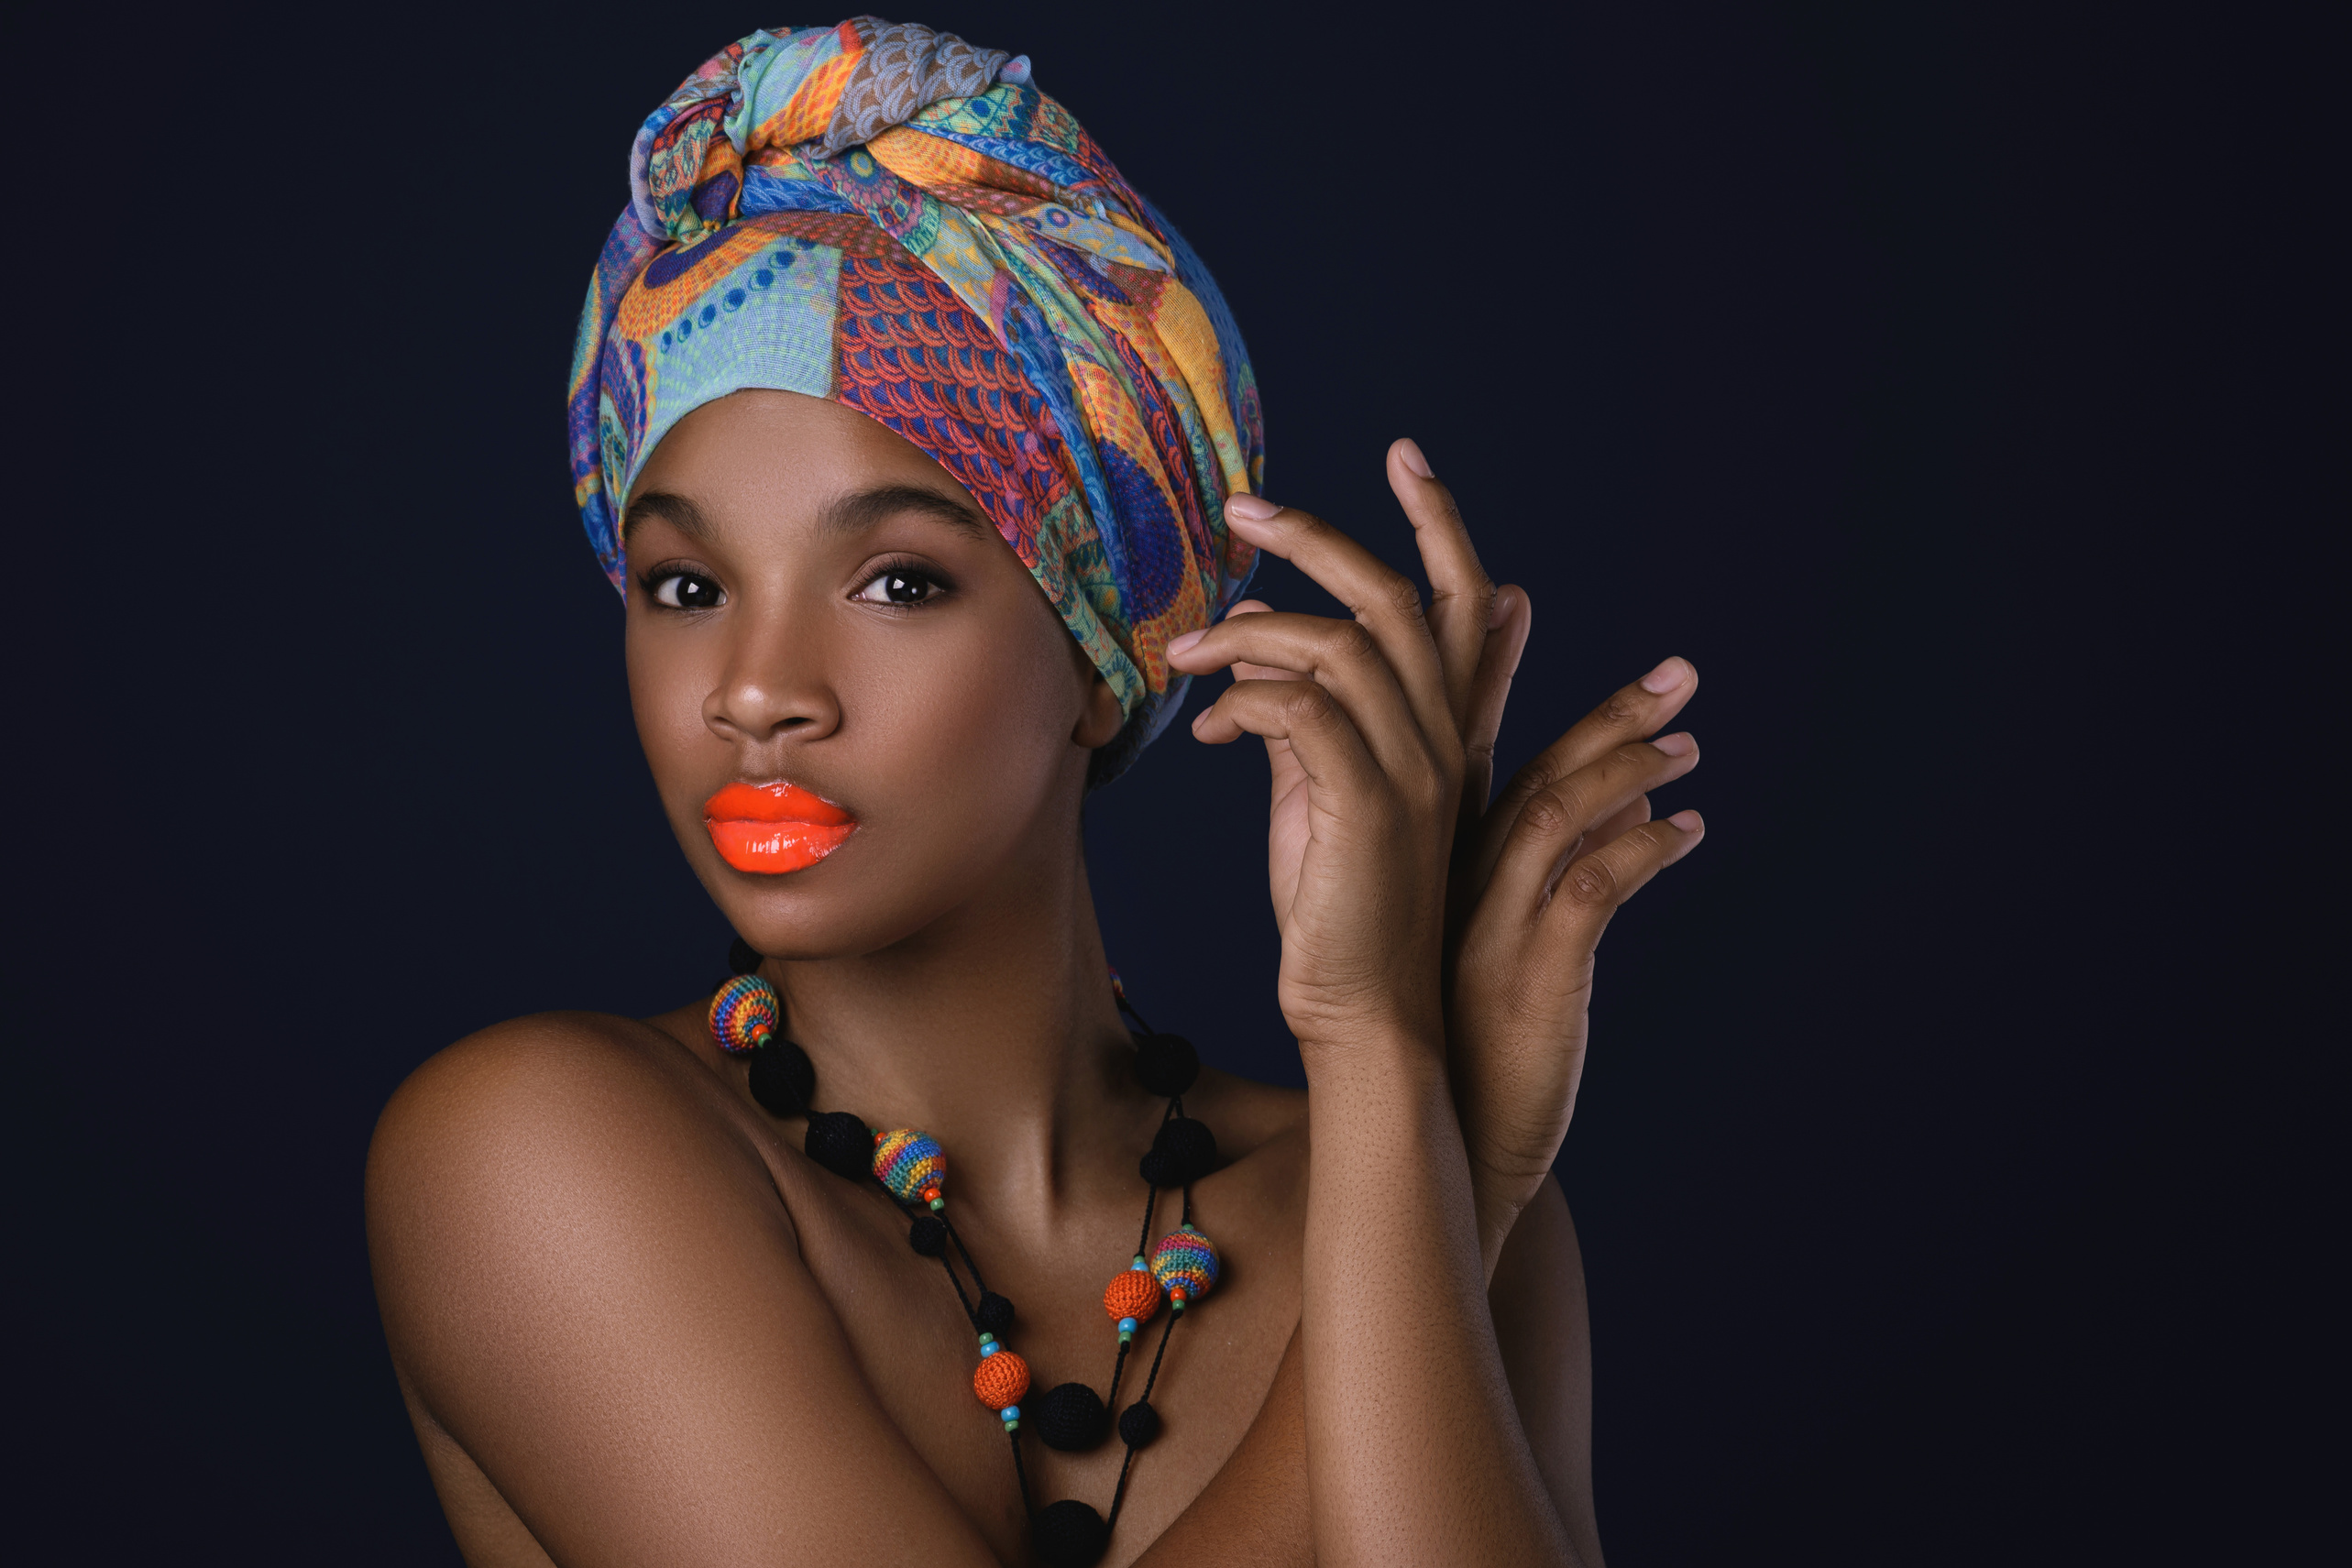 Woman with Shawl on Her Head and Neon Lipstick